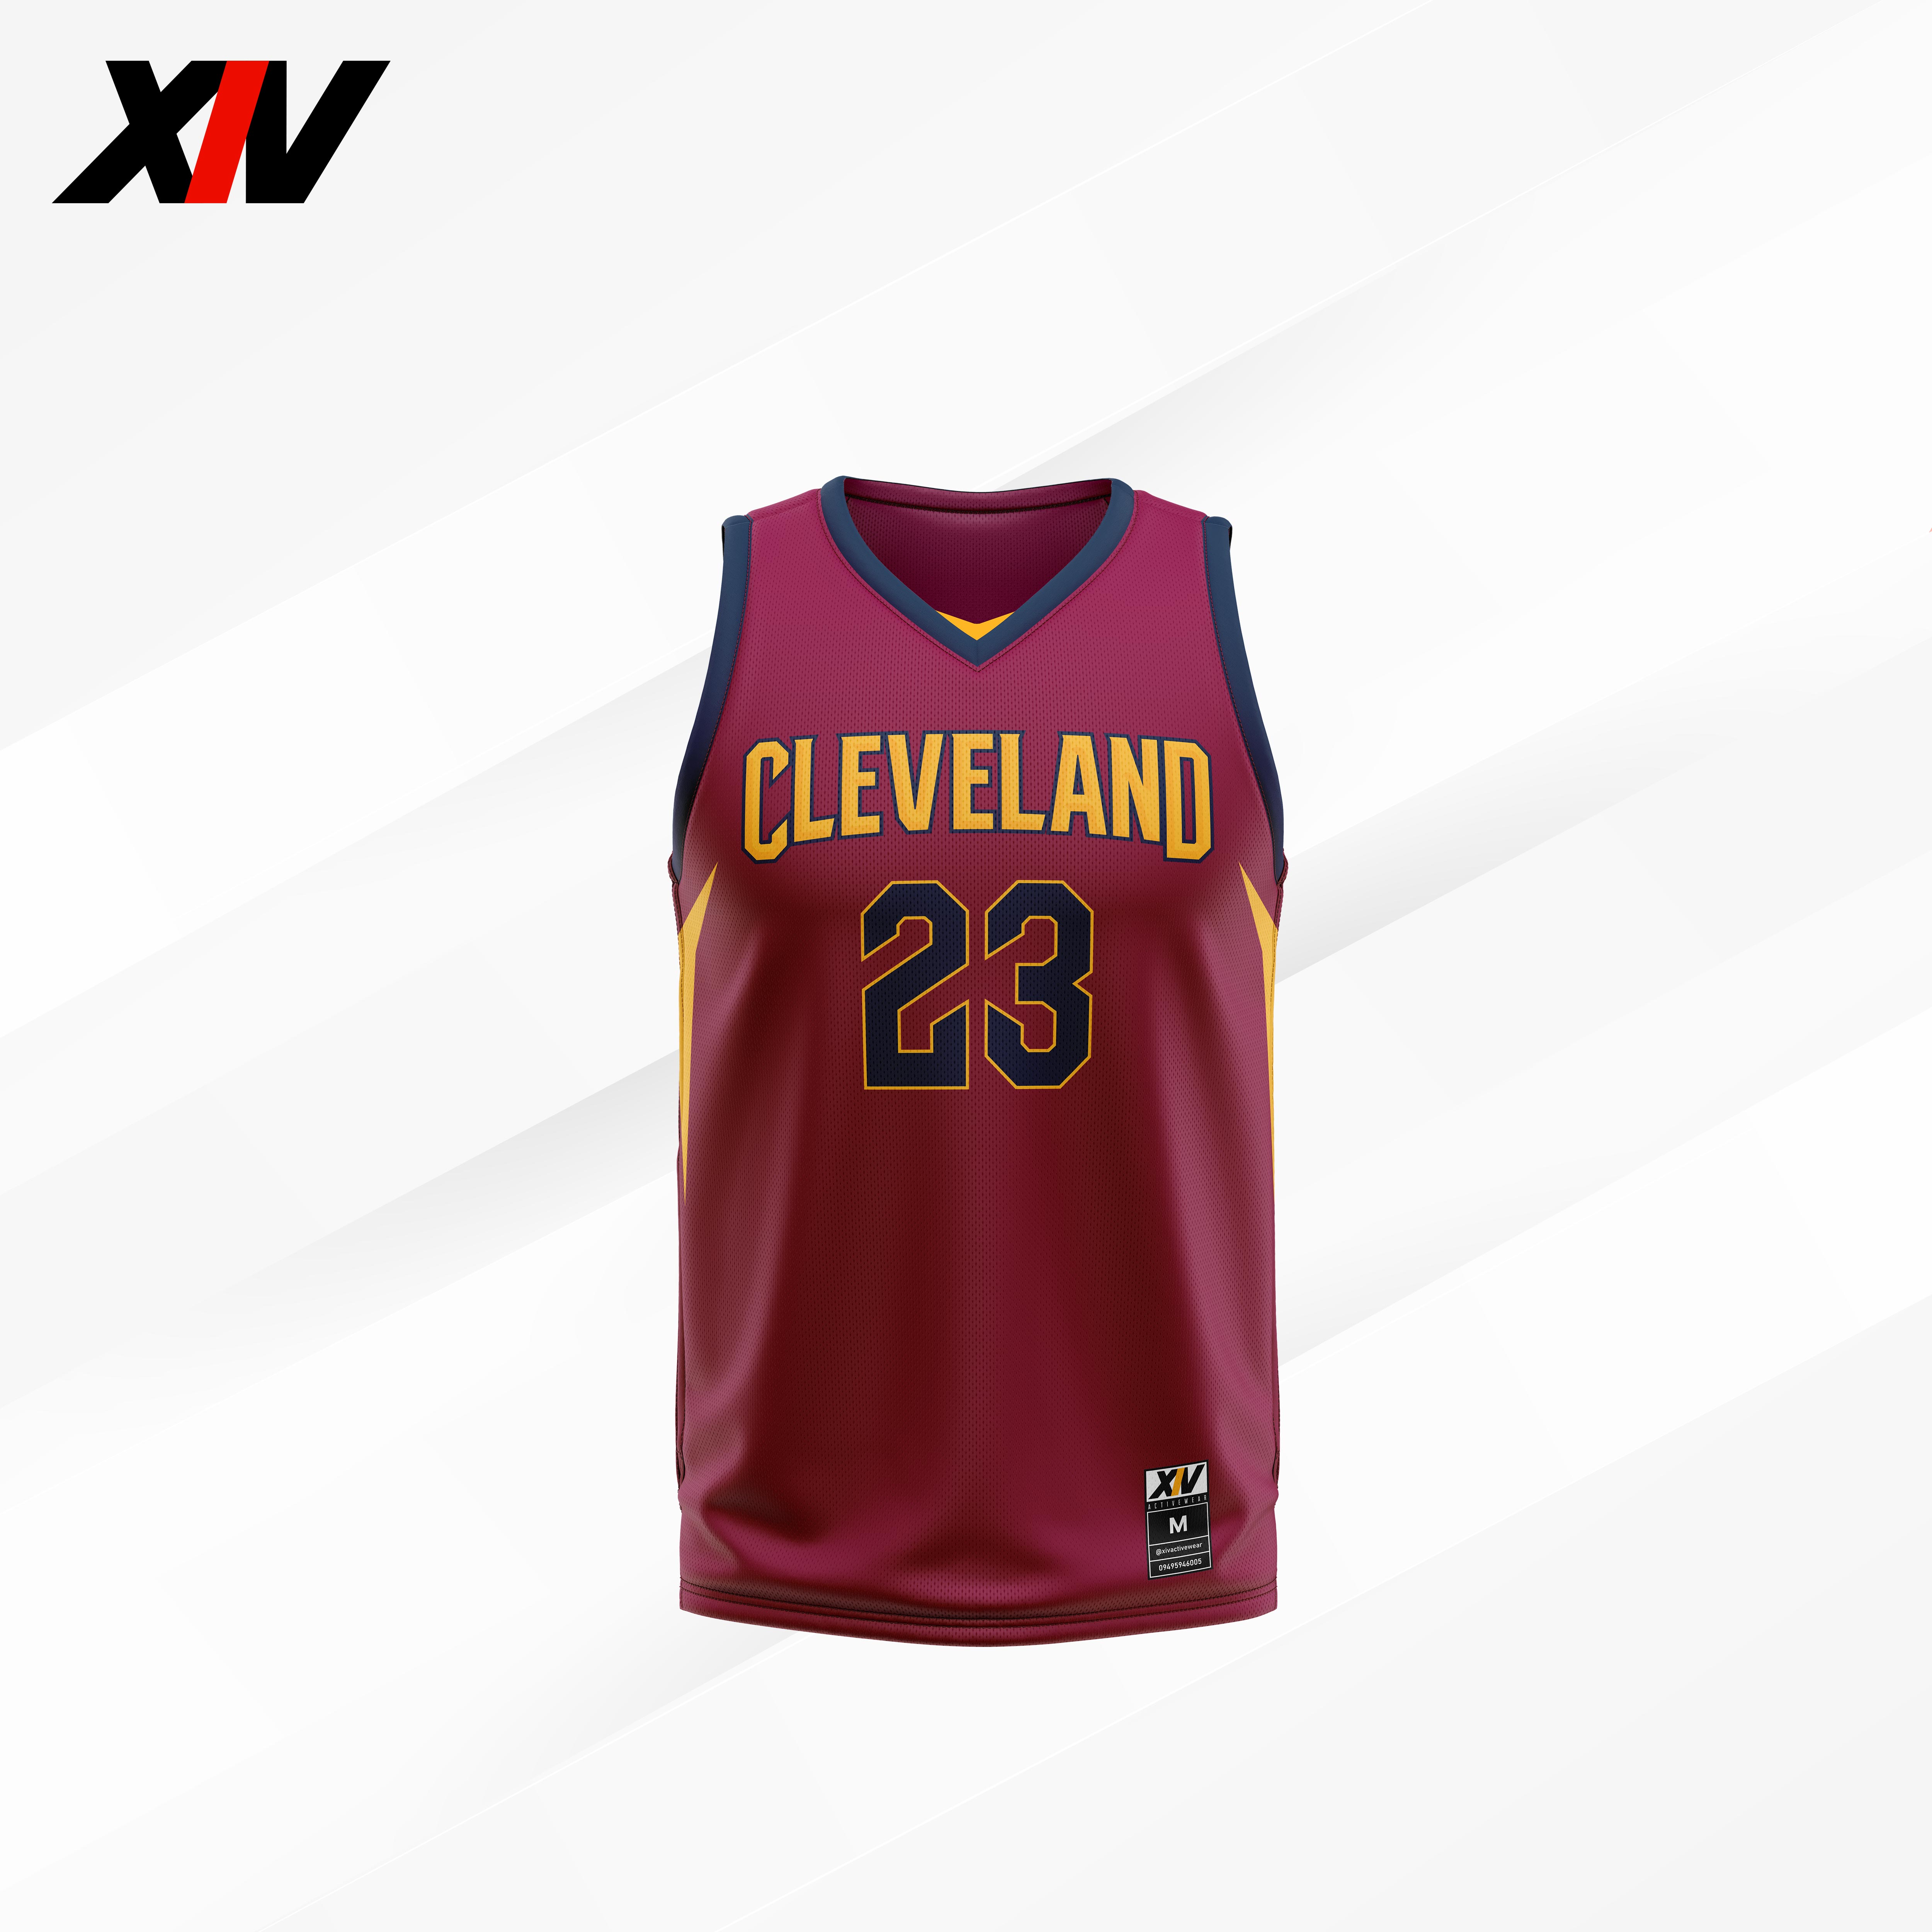 cleveland maroon jersey